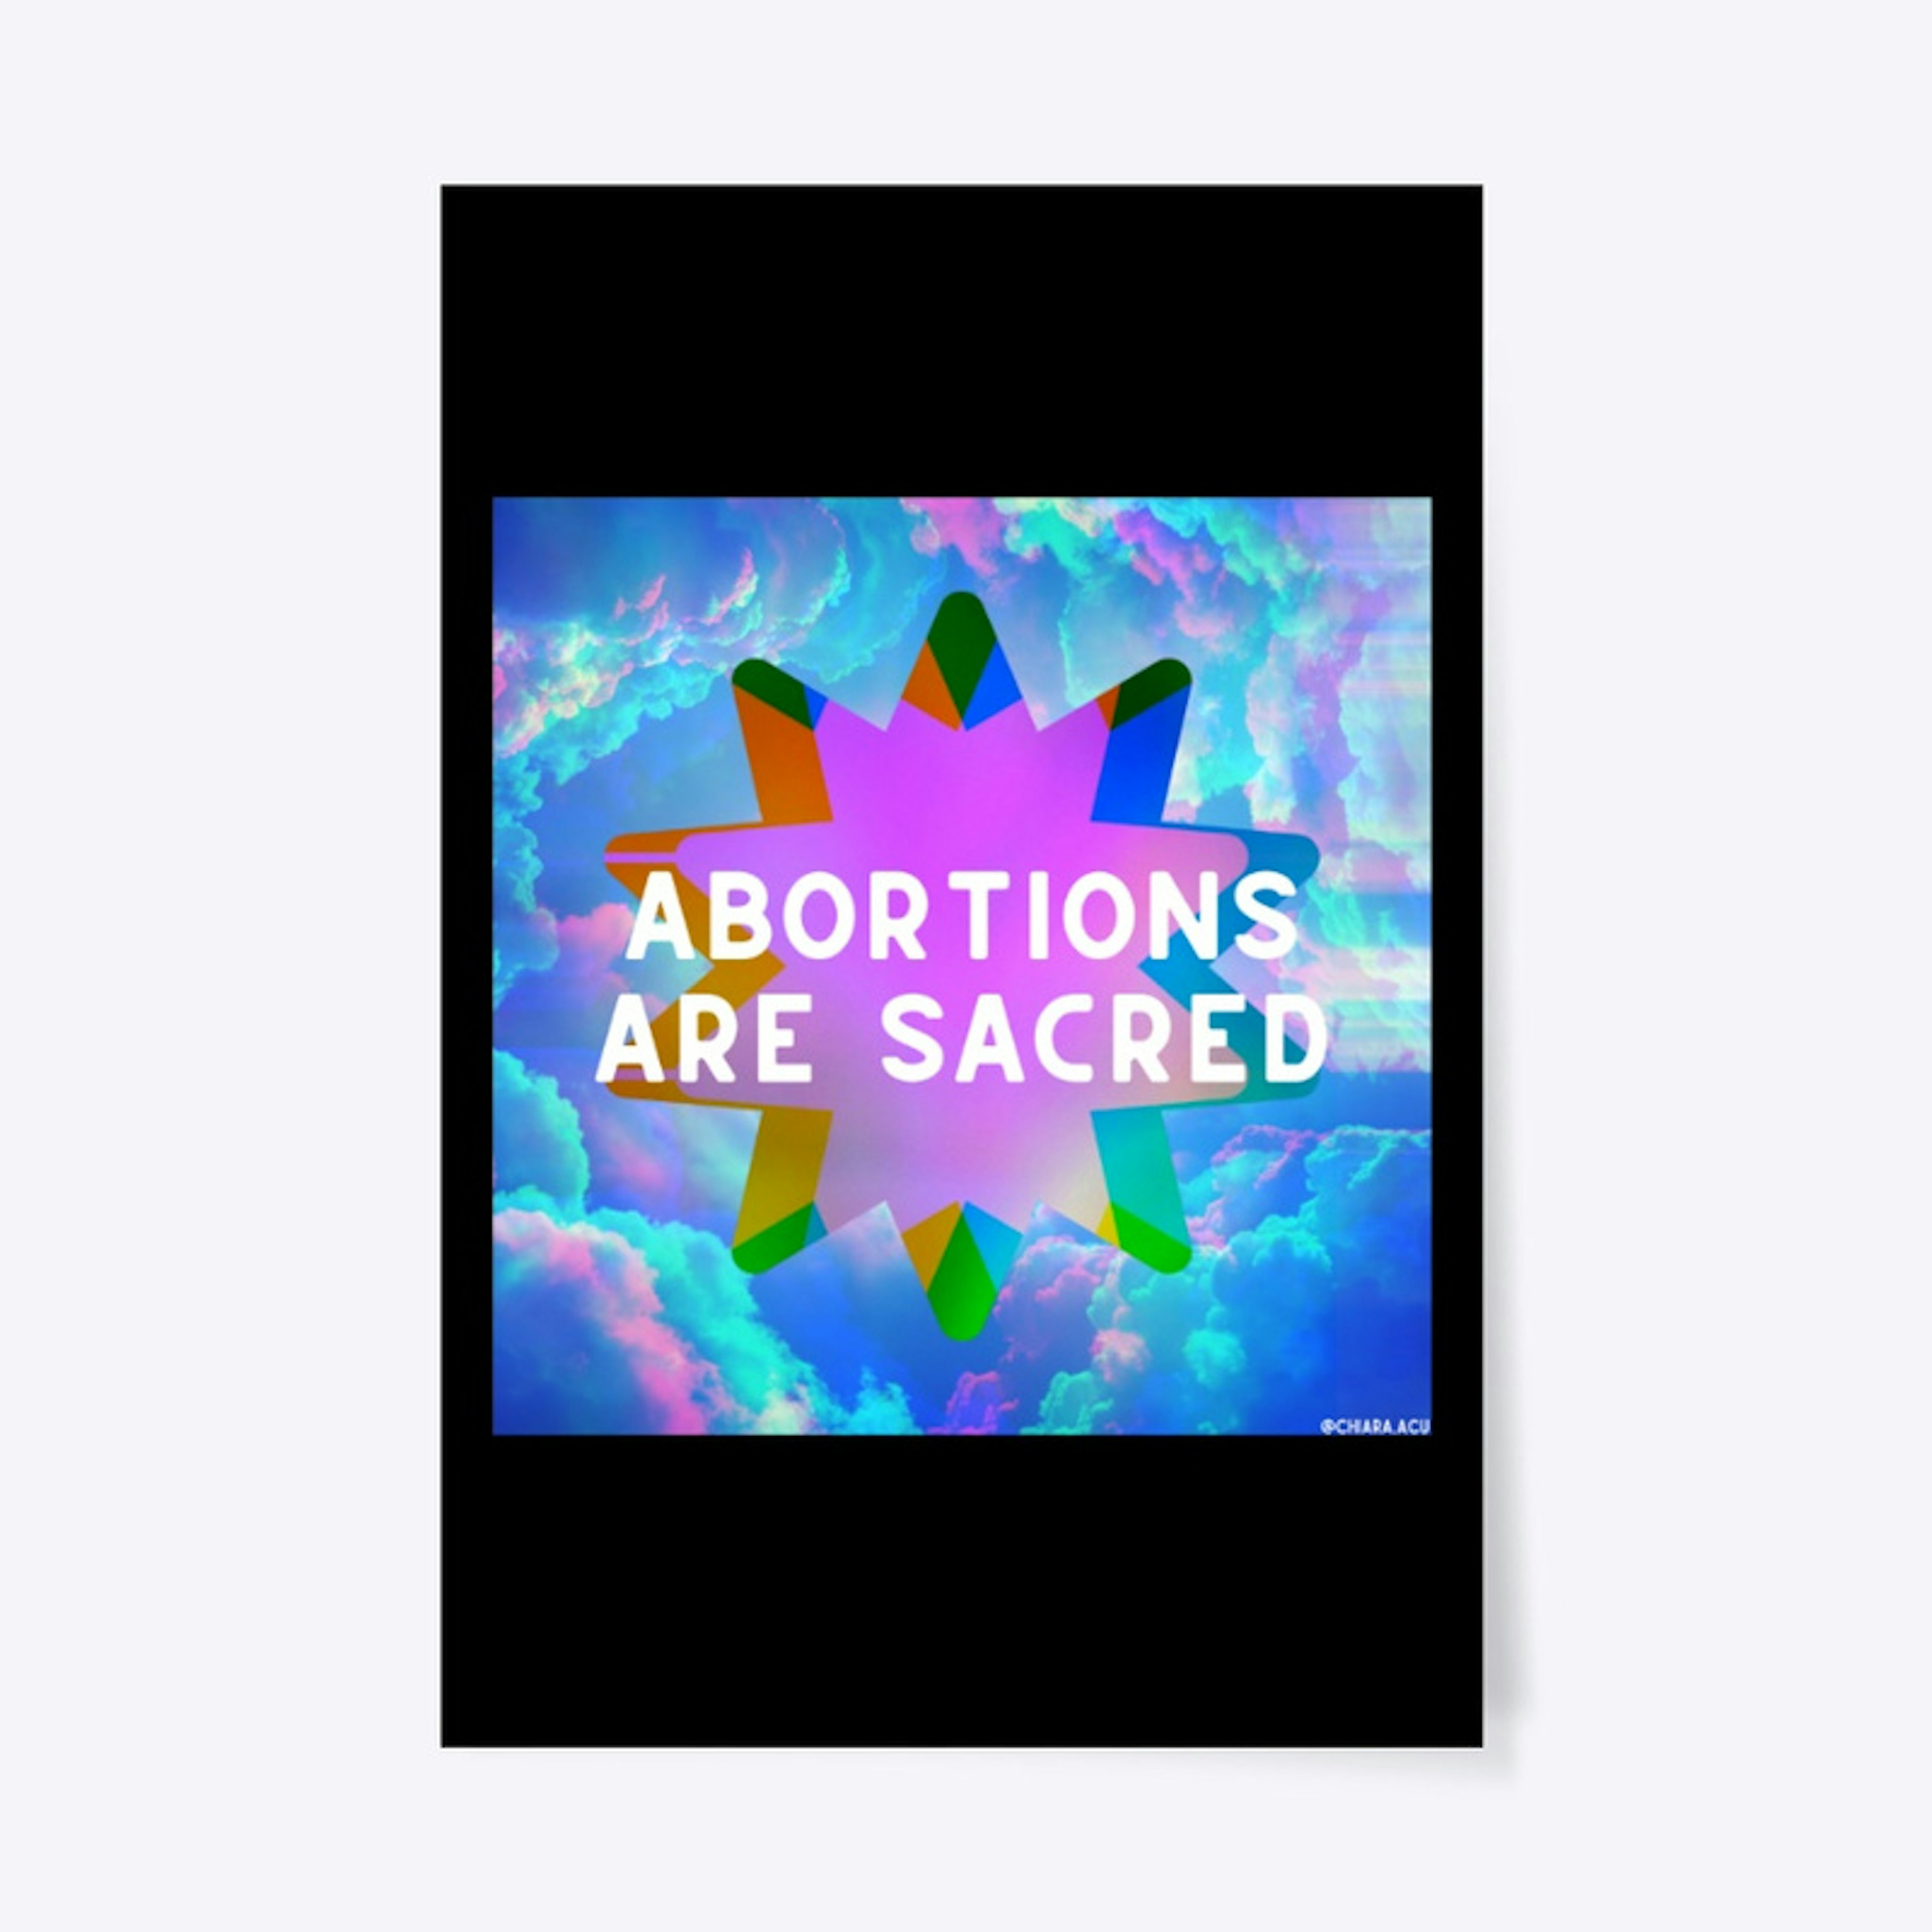 abortions are sacred